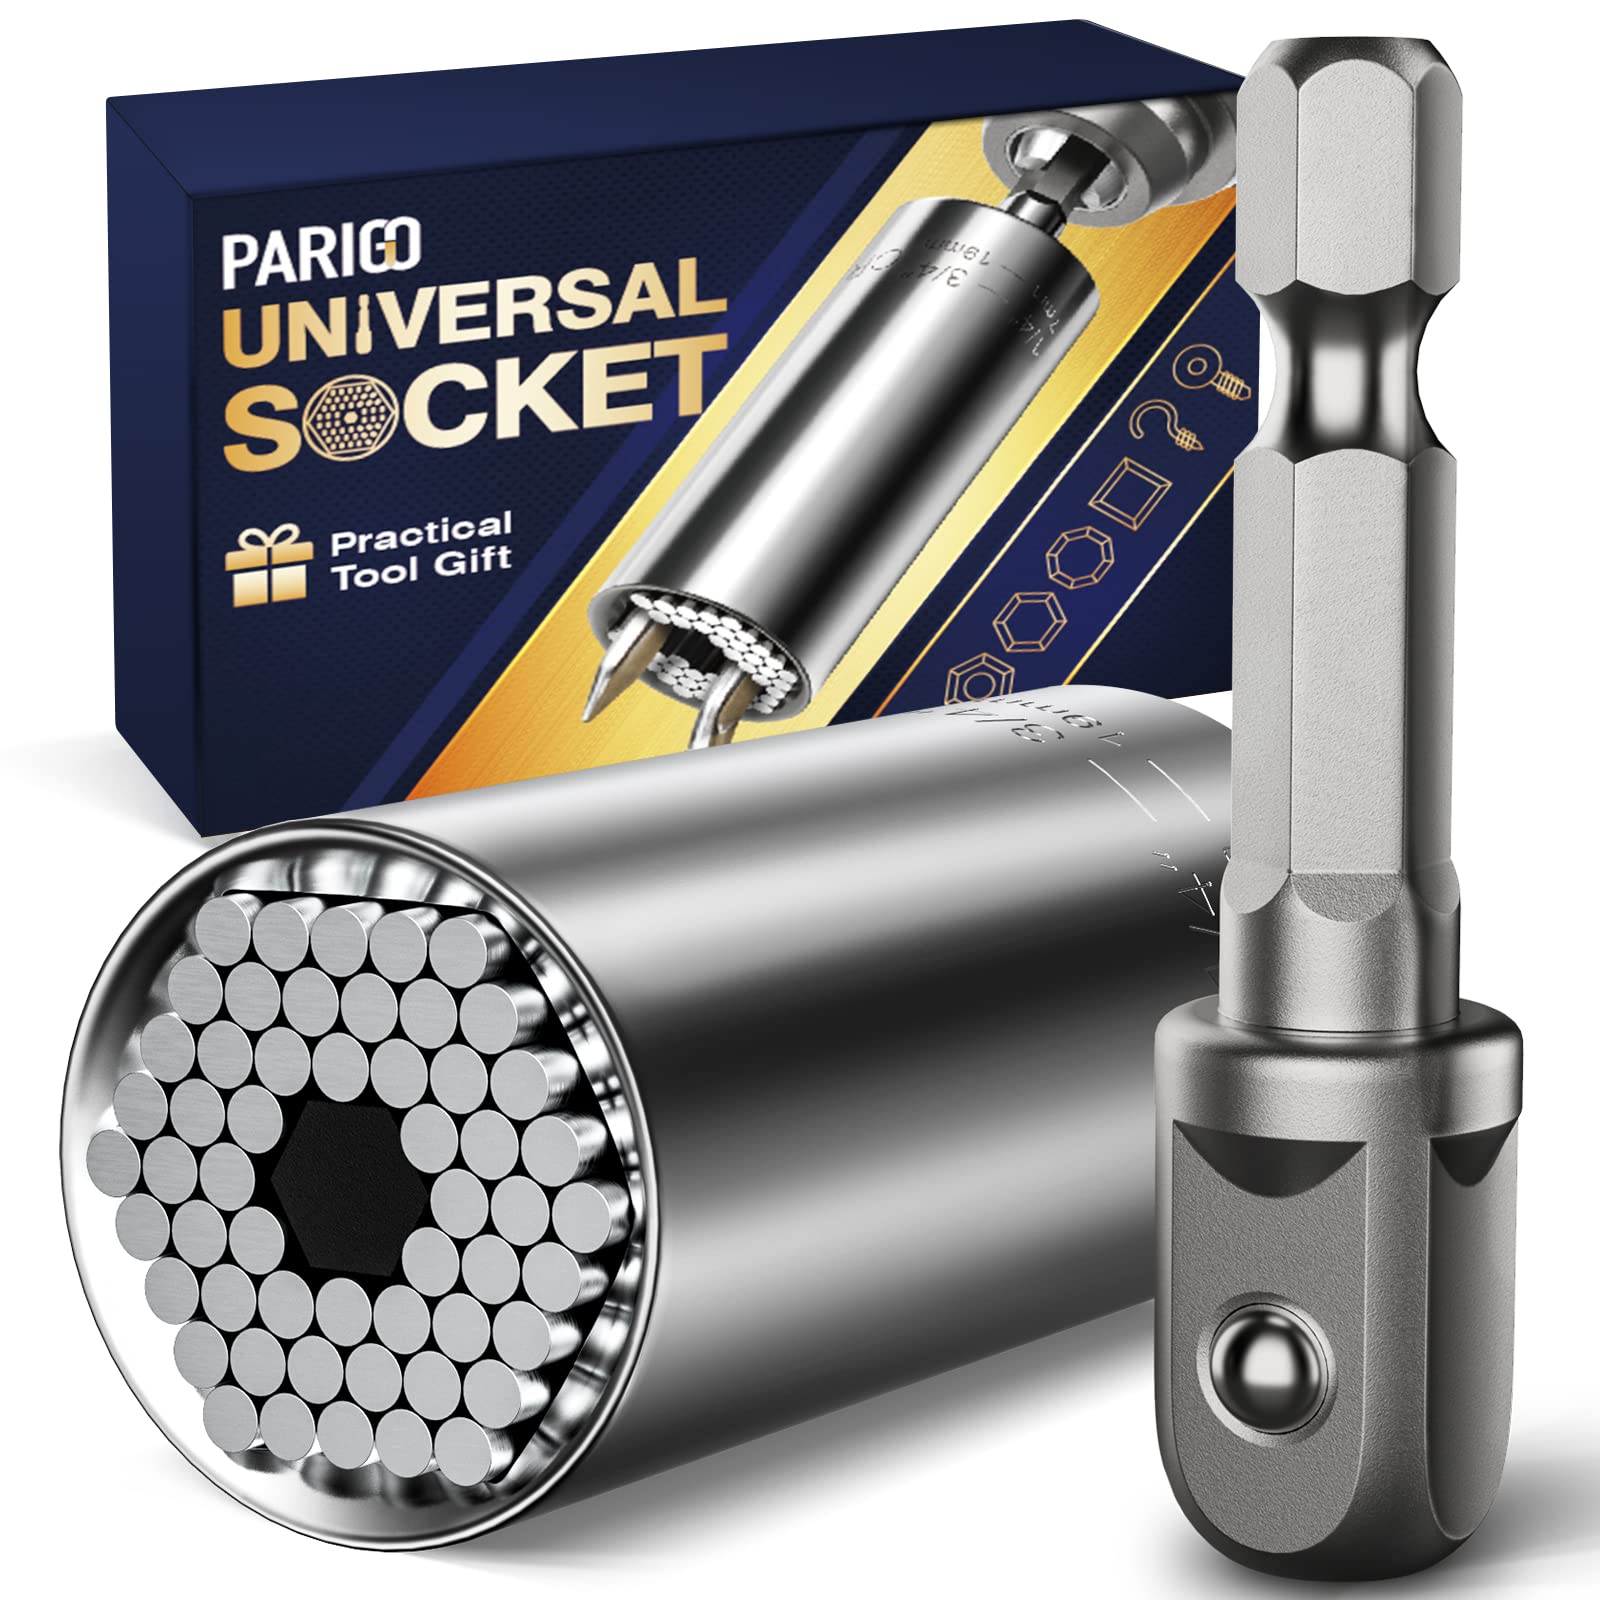 Universal Socket Tools Gifts for Men: Christmas Gifts Stocking Stuffers for Dad Boyfriend Husband Professional 7mm-19mm Super Socket Tool Sets Power Drill Adapter Unique Cool Gadgets Birthday Gift